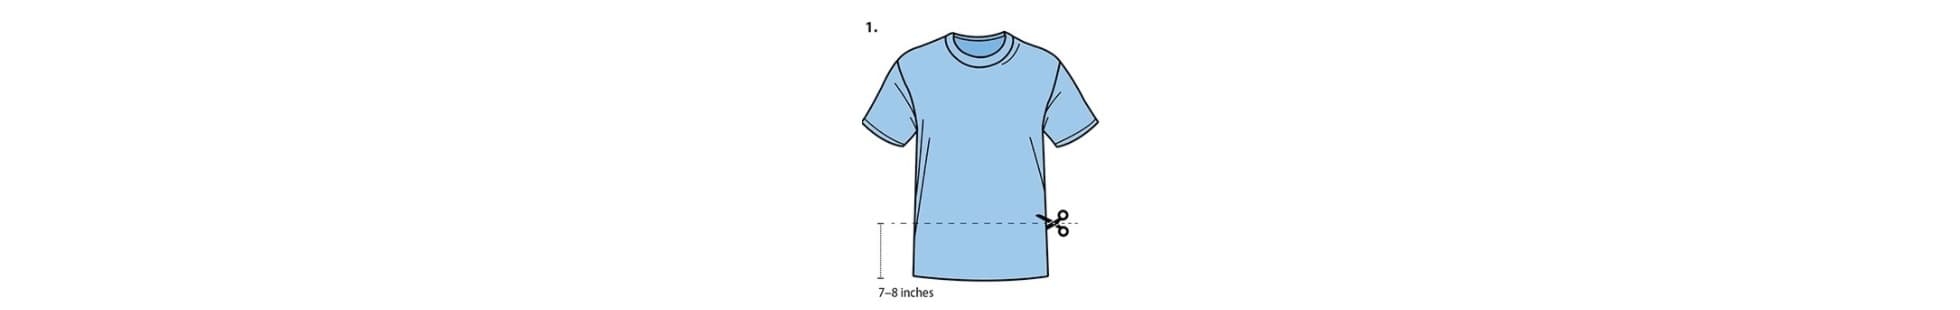 Where to cut on t-shirt